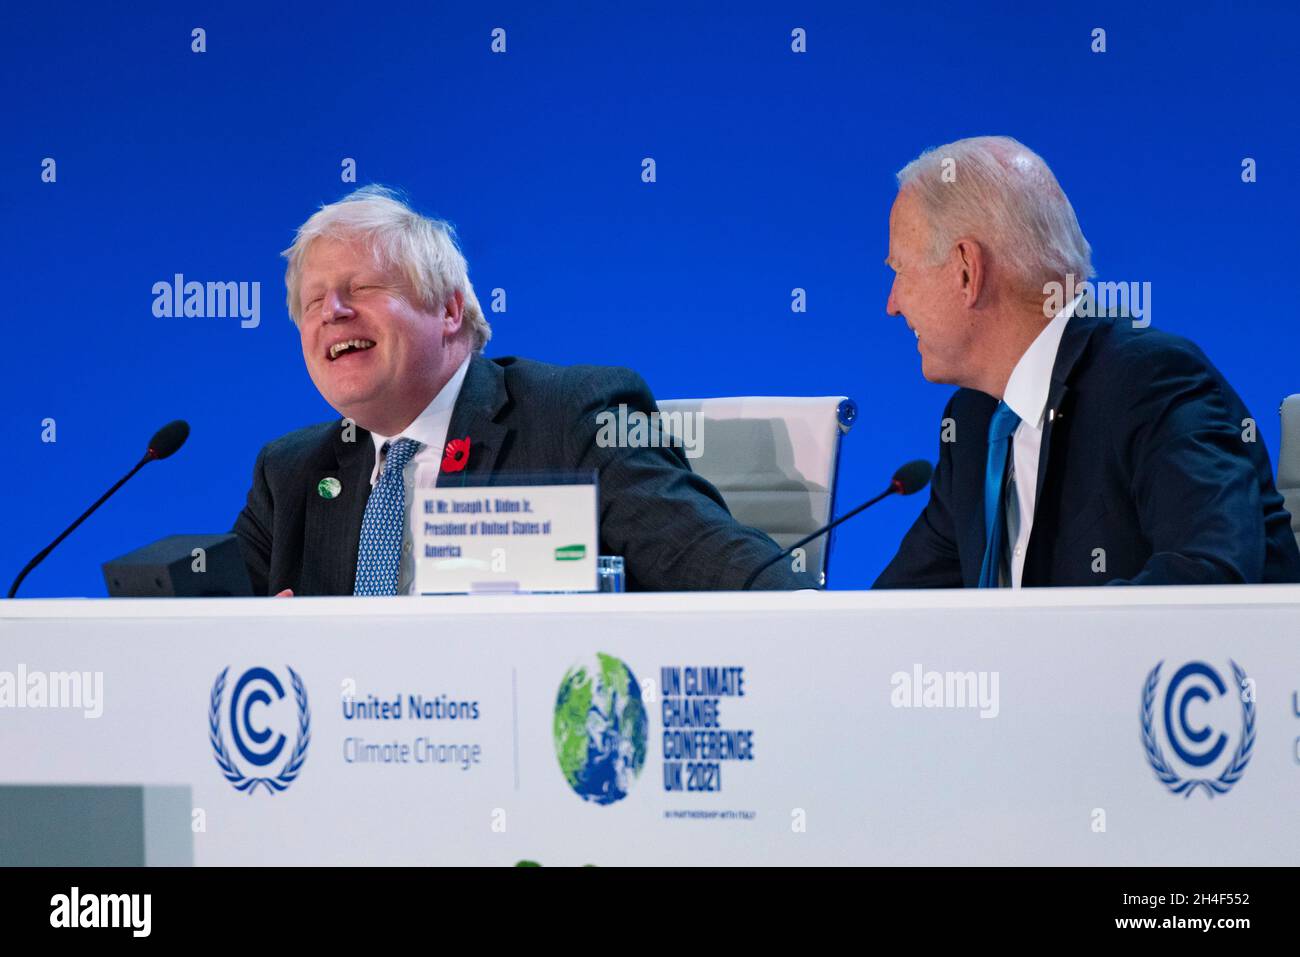 Glasgow, Scotland, UK. 2nd November 2021.  World leaders make climate change speeches at COP26 in Glasgow. They spoke during the World Leaders' Summit 'Accelerating Clean Technology Innovation and Deployment' session on day 3 of the conference. Pic; Boris Johnson and Joe Biden share a joke. Iain Masterton/Alamy Live News. Stock Photo